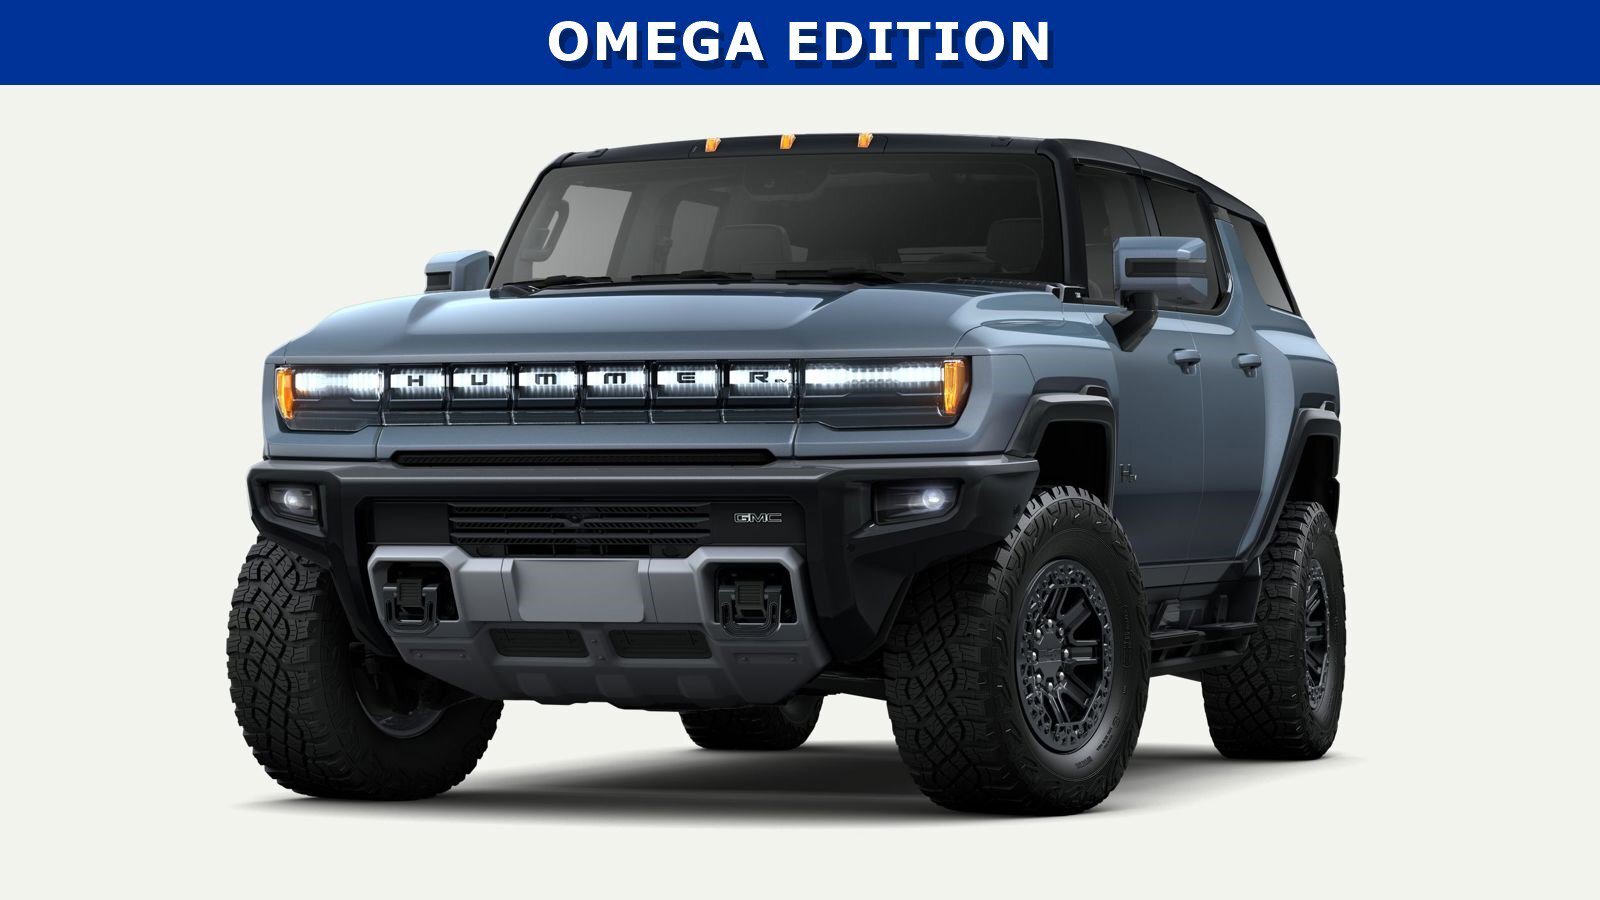 2024 GMC HUMMER EV SUV 3X Omega Edition - Extreme Off-Road Package 4x4 Su